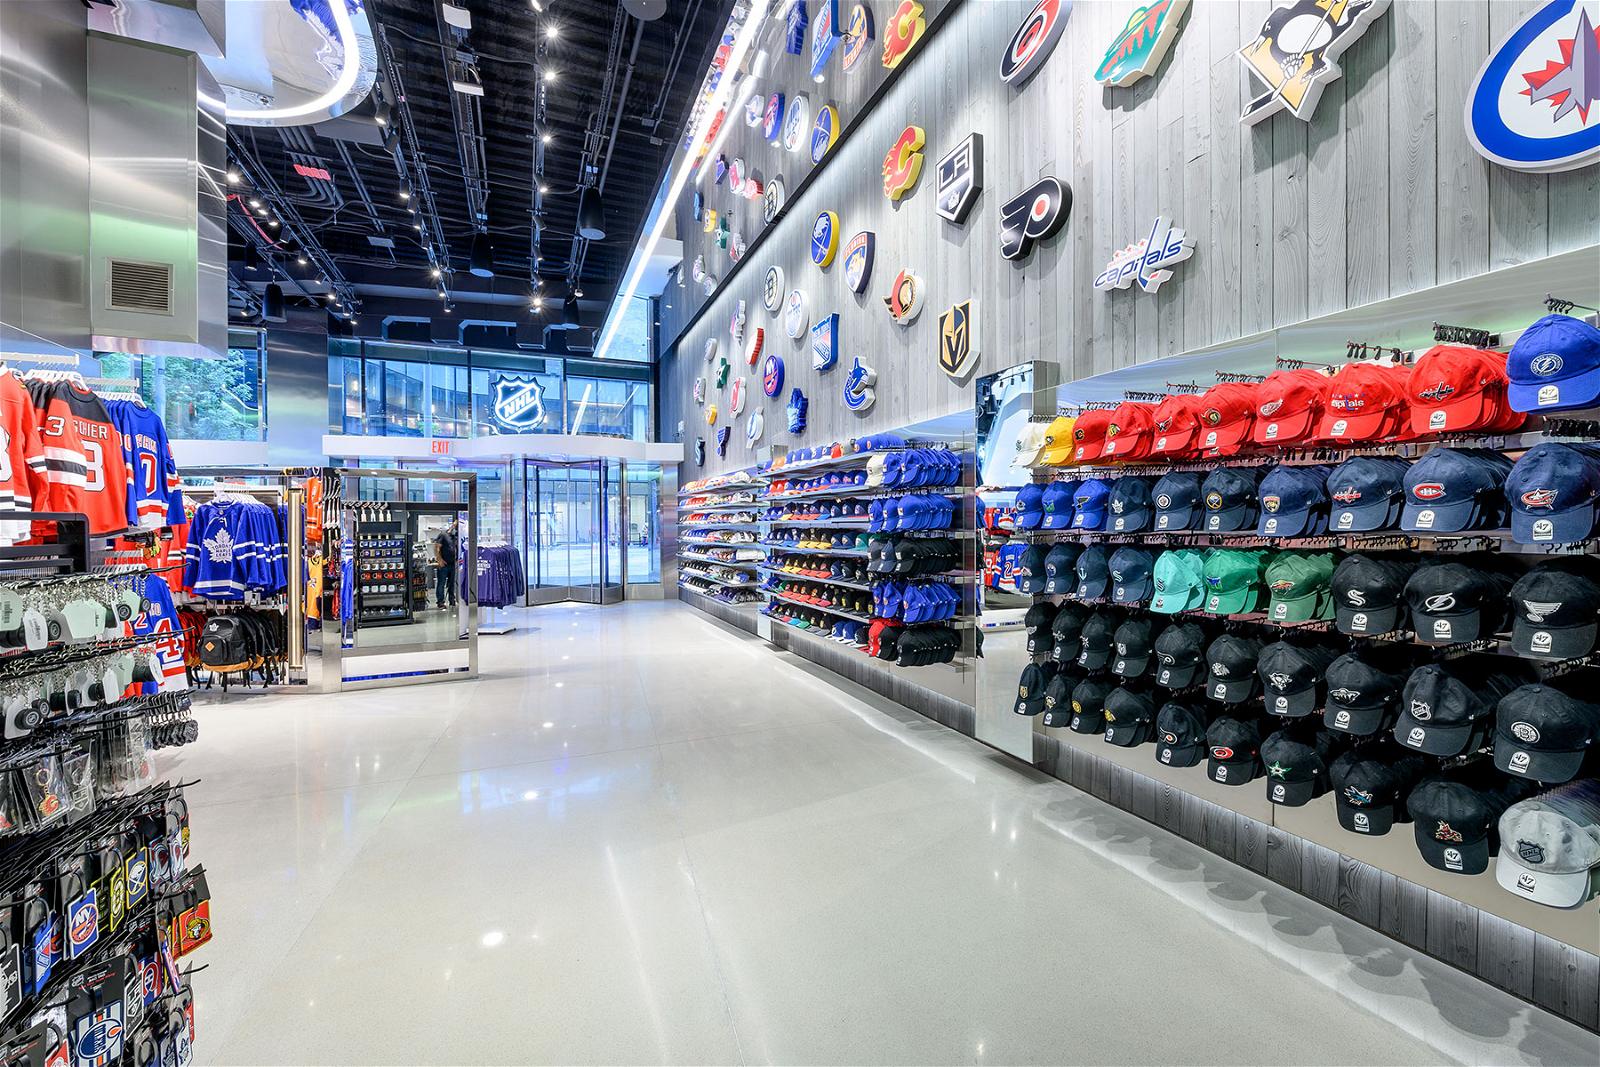 NHL to Open New NYC Flagship Store w/ Lids and Fanatics